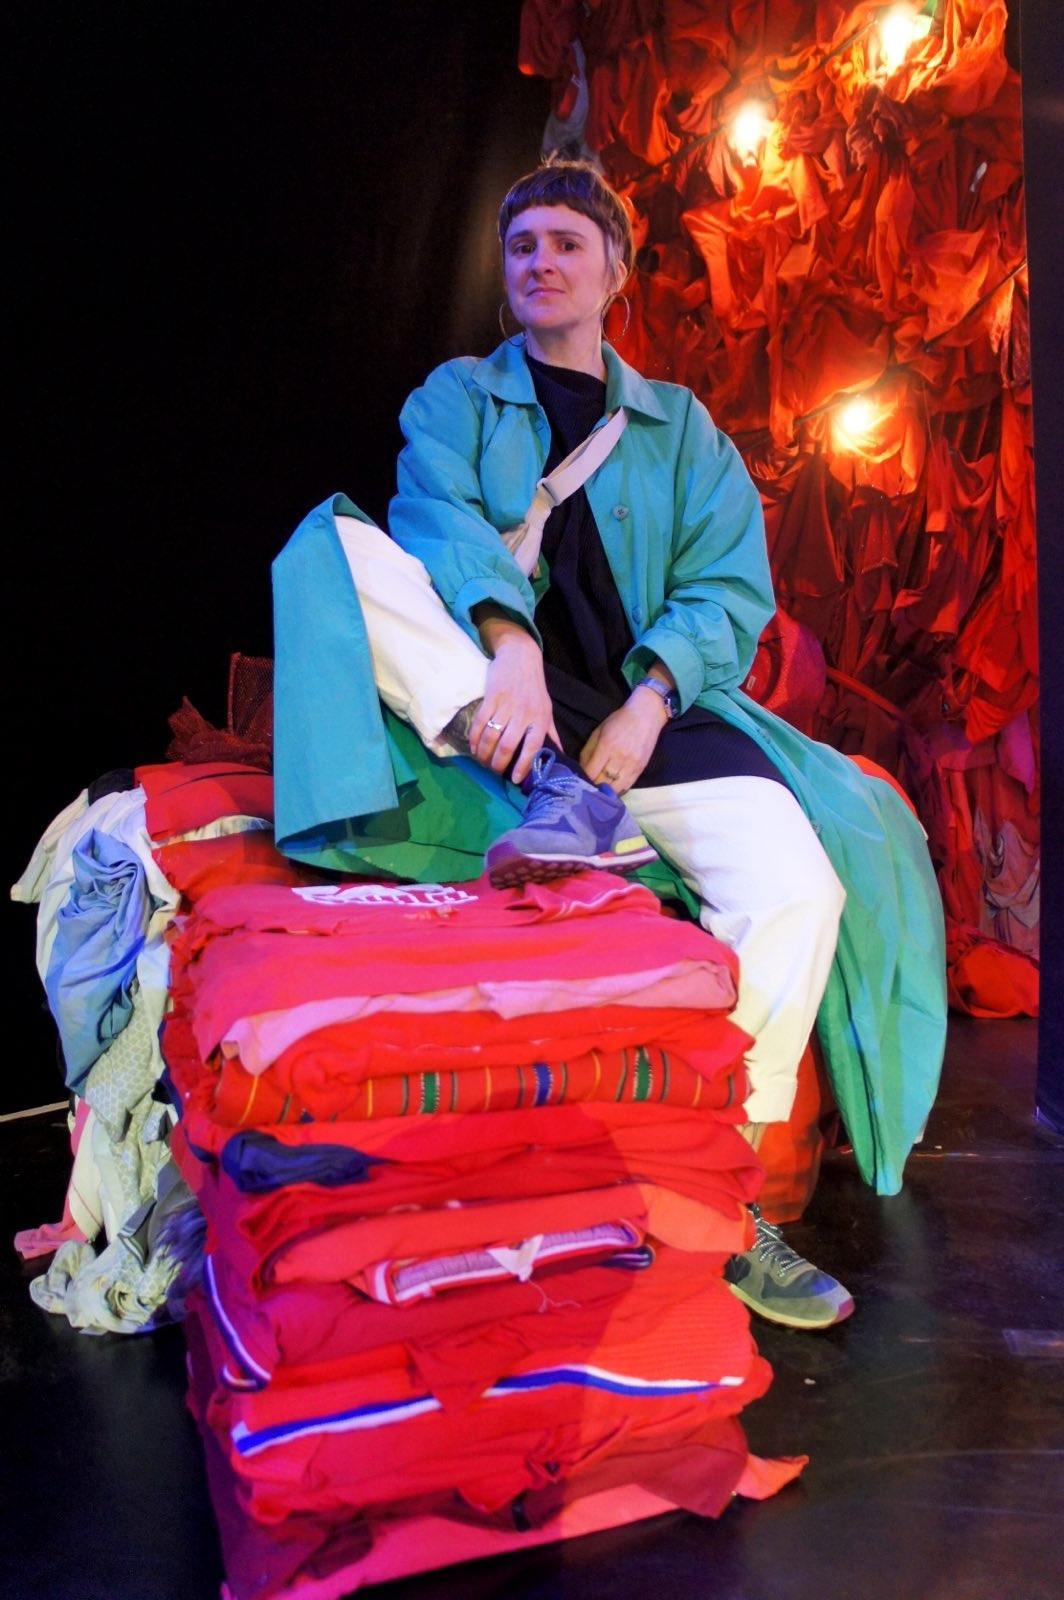 Photo of Sexy Roy sitting on piles of fabric. They are wearing a long turquoise coat and wearing big hooped ear rings. Behind them is a wall of illuminated red fabric.